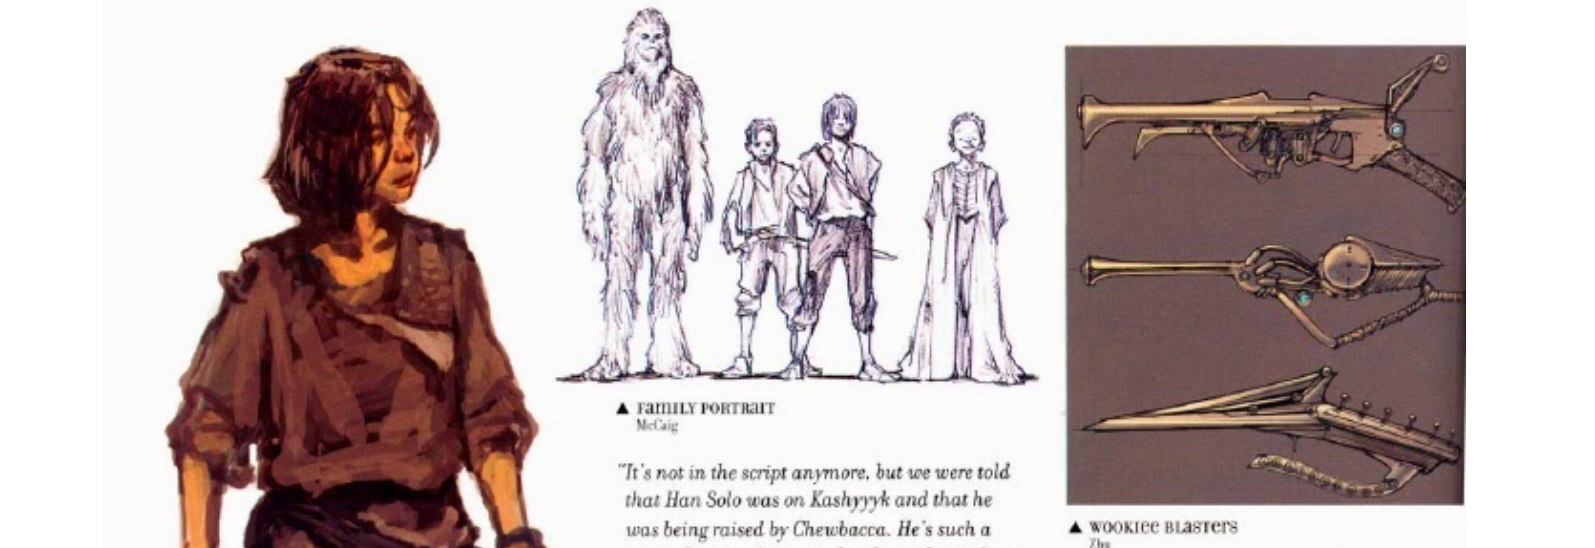 6. Han Solo orphan raised by Chewie (Terrible Star Wars Ideas)